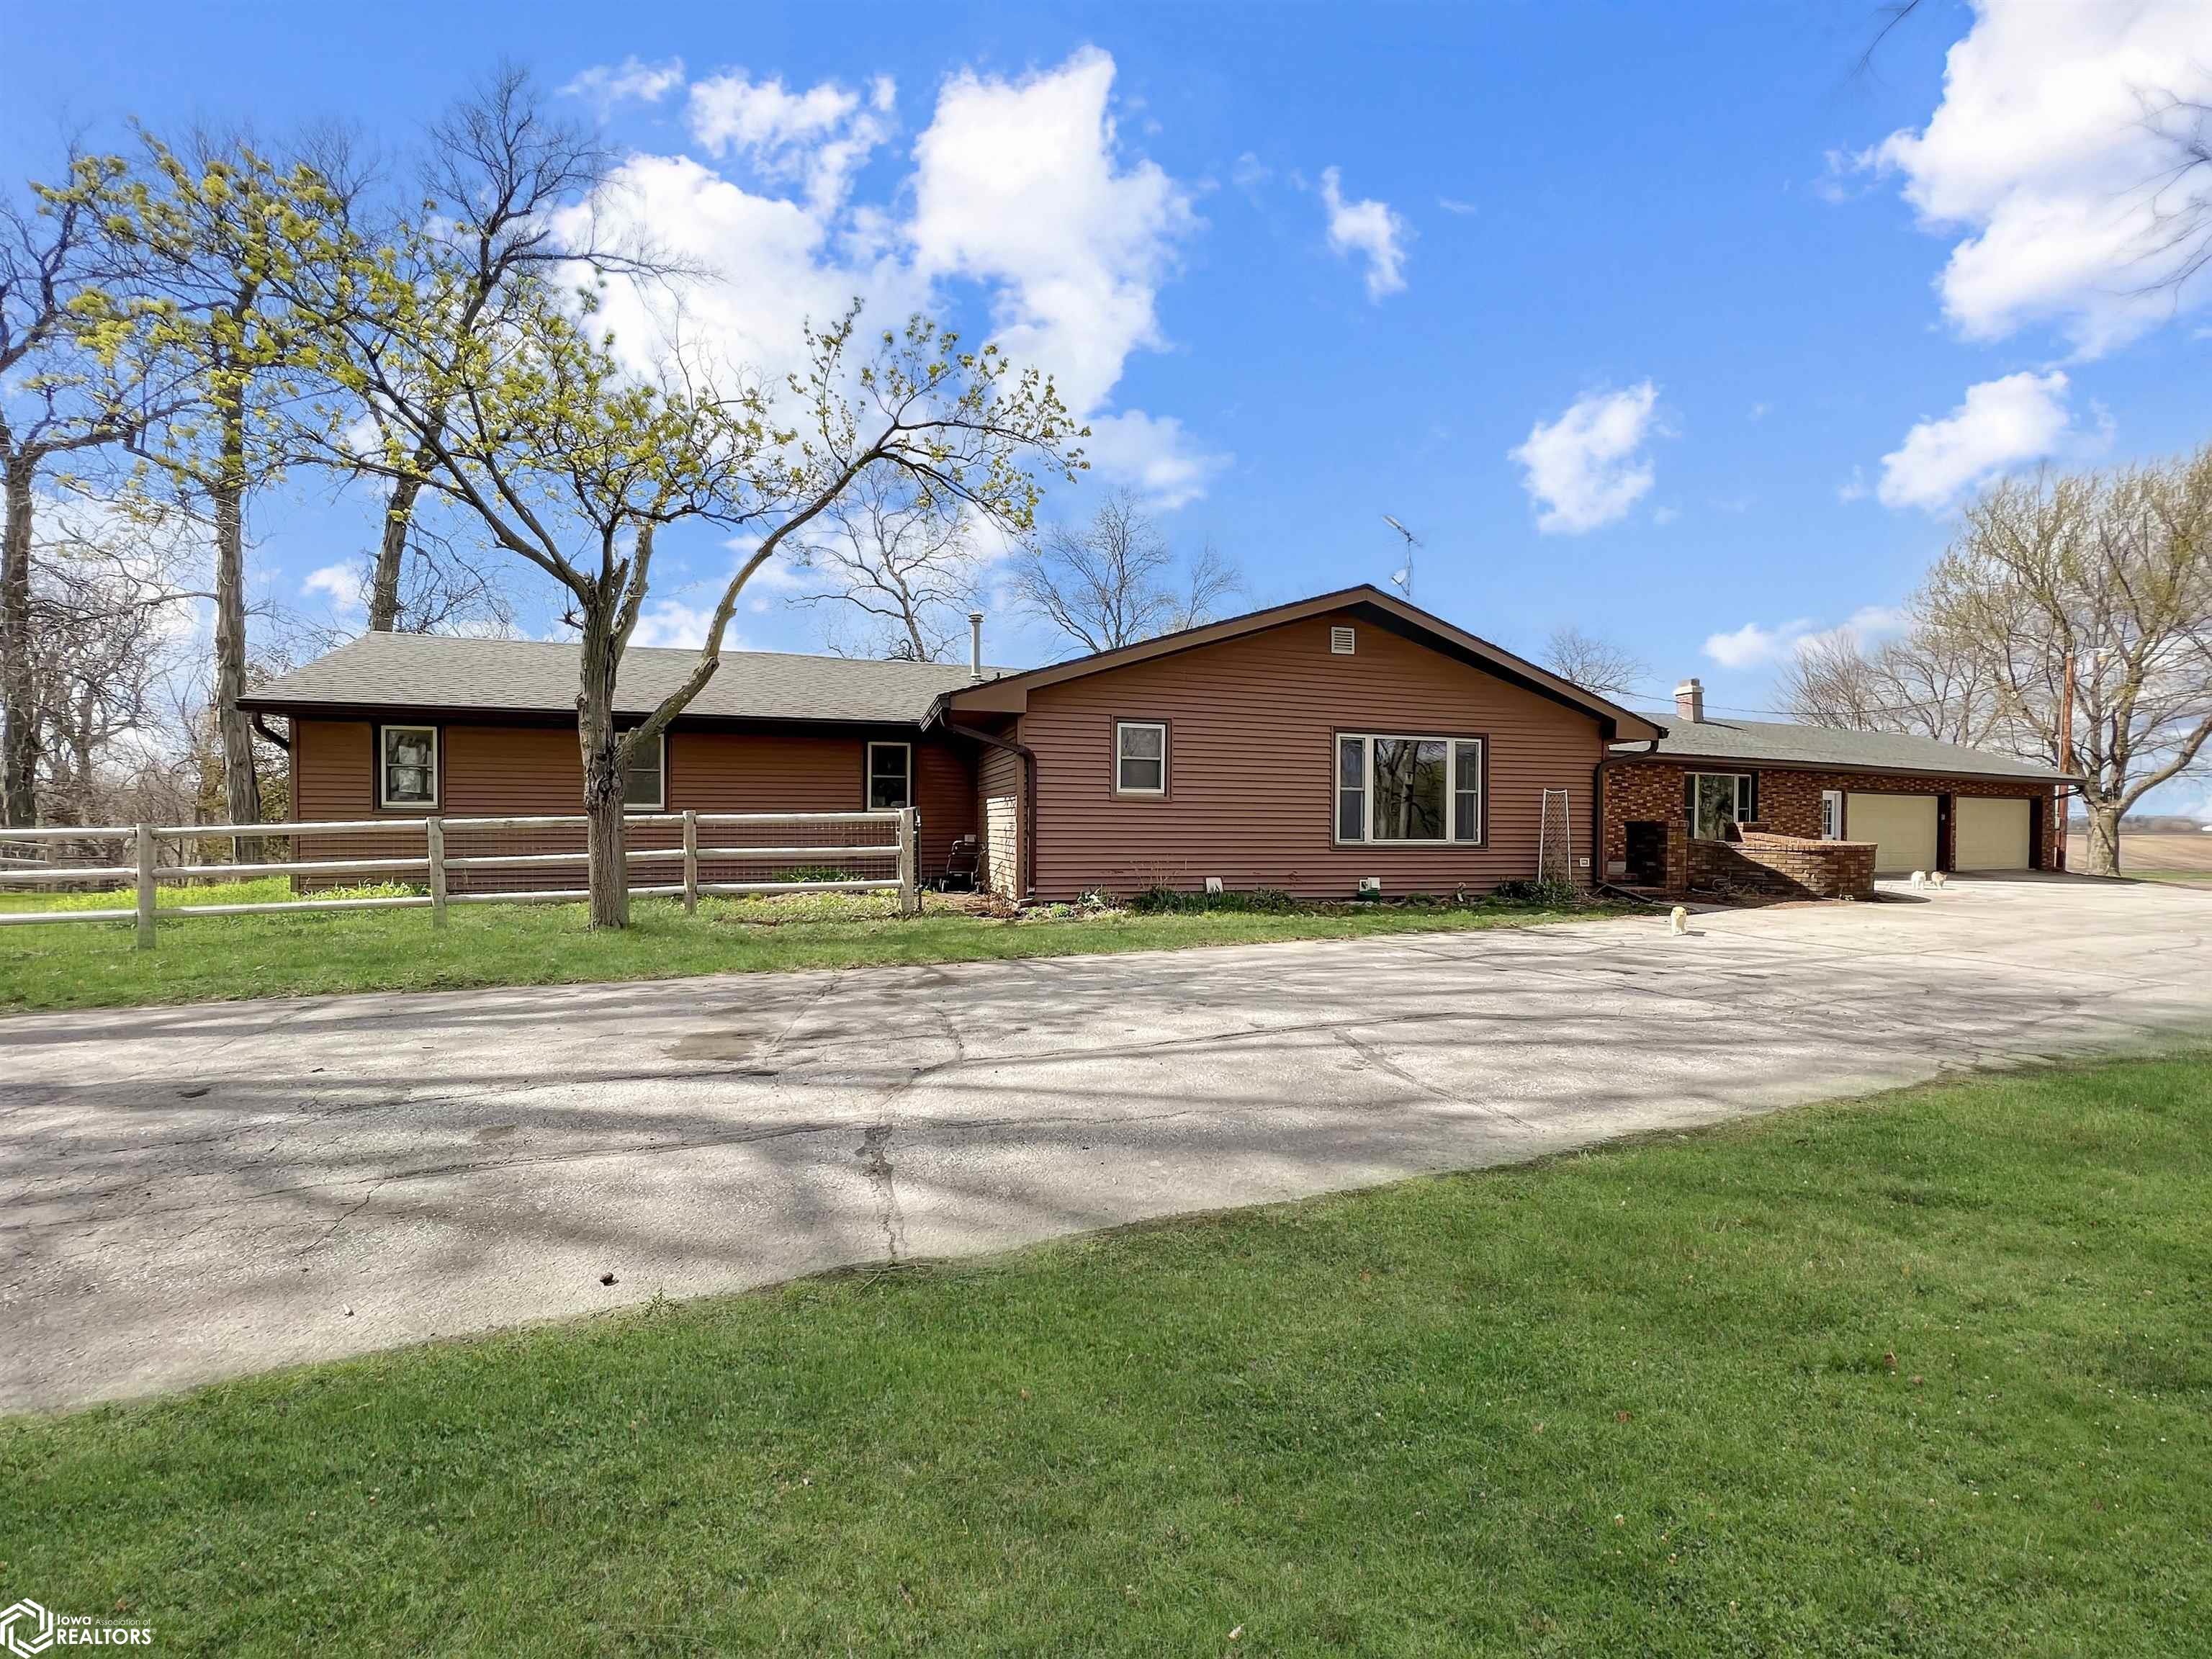 19226 125th St, Alden, Iowa 50006, 3 Bedrooms Bedrooms, ,2 BathroomsBathrooms,Single Family,For Sale,125th St,6316529